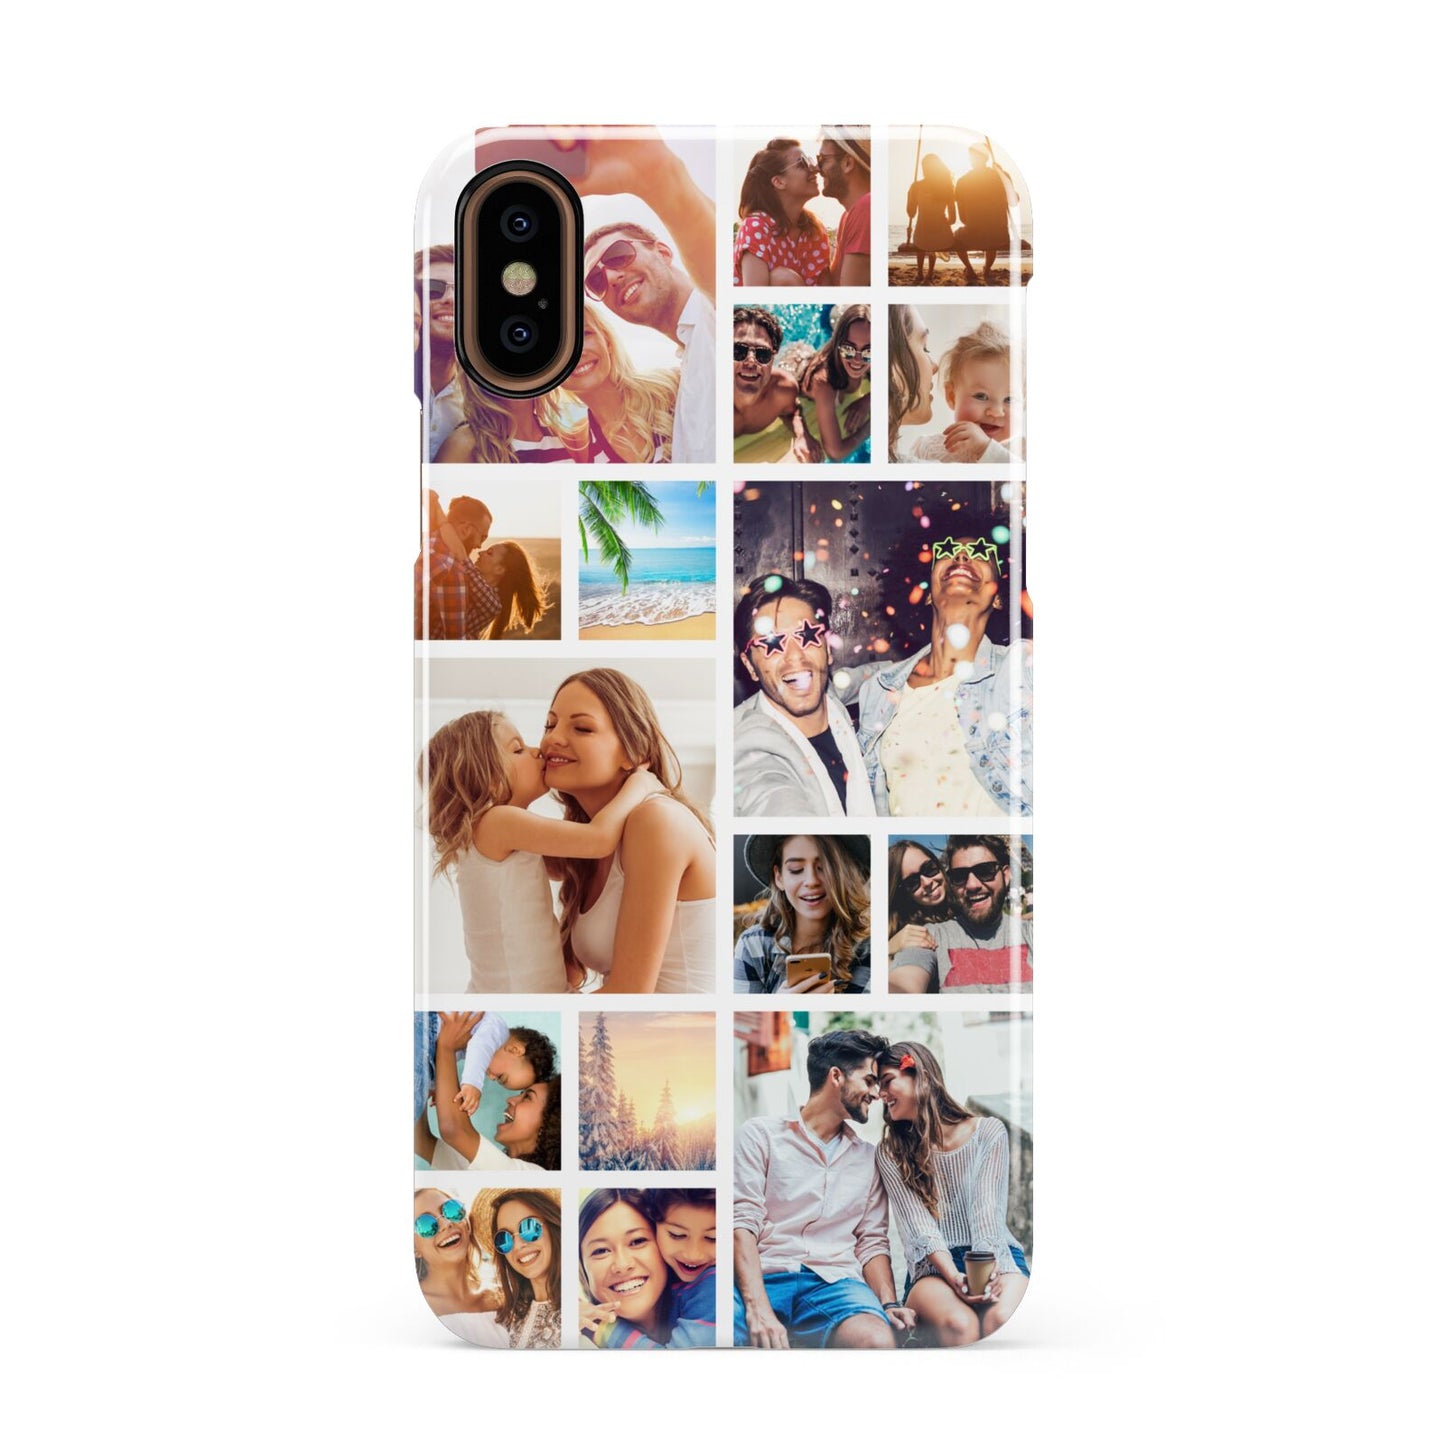 Abstract Multi Tile Photo Montage Upload Apple iPhone XS 3D Snap Case